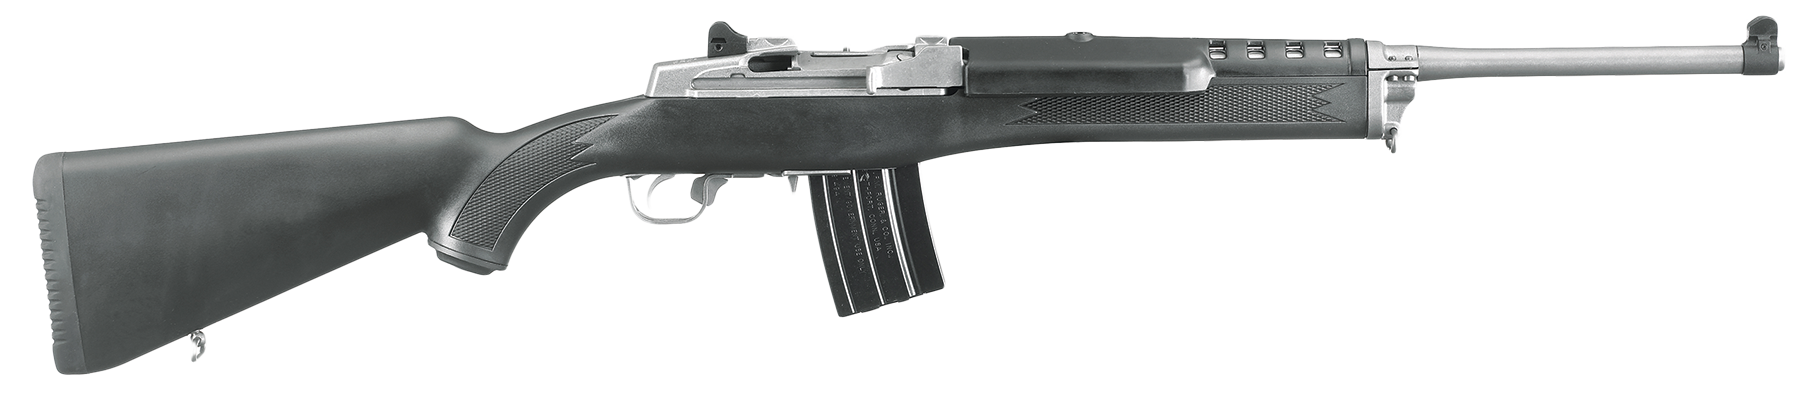 Image of RUGER MINI-14 RANCH RIFLE